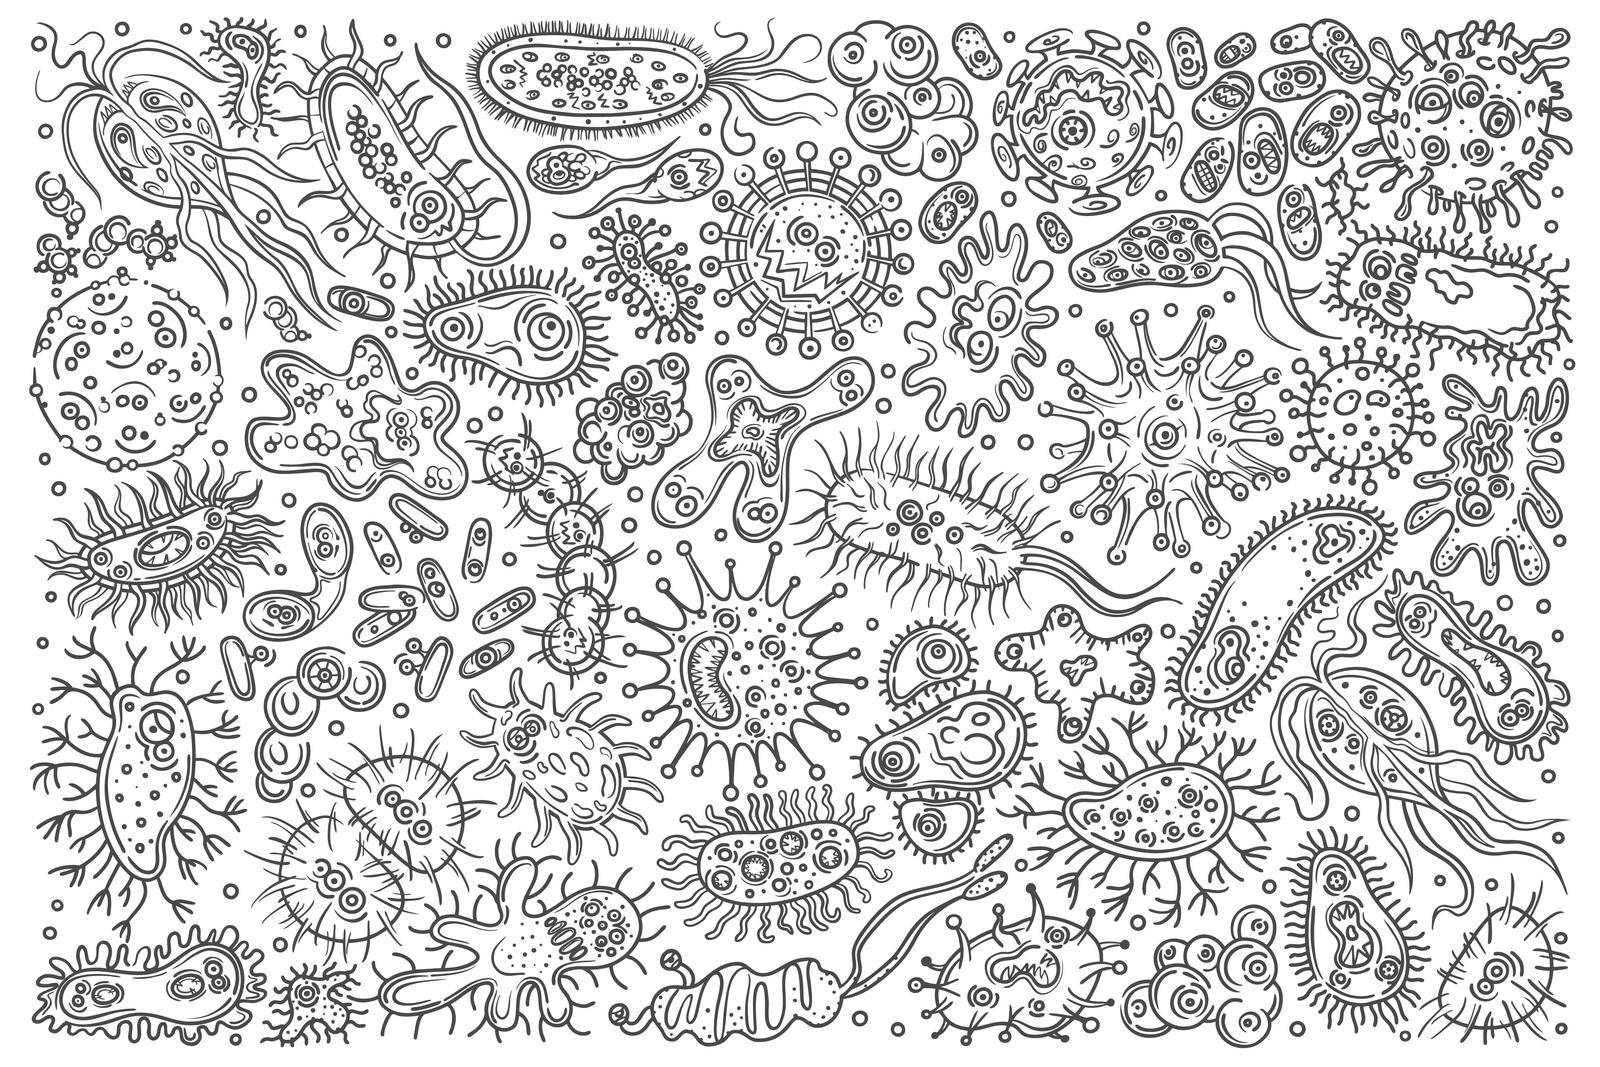 Hand drawn different bacteria and viruses. by VECTORIUM